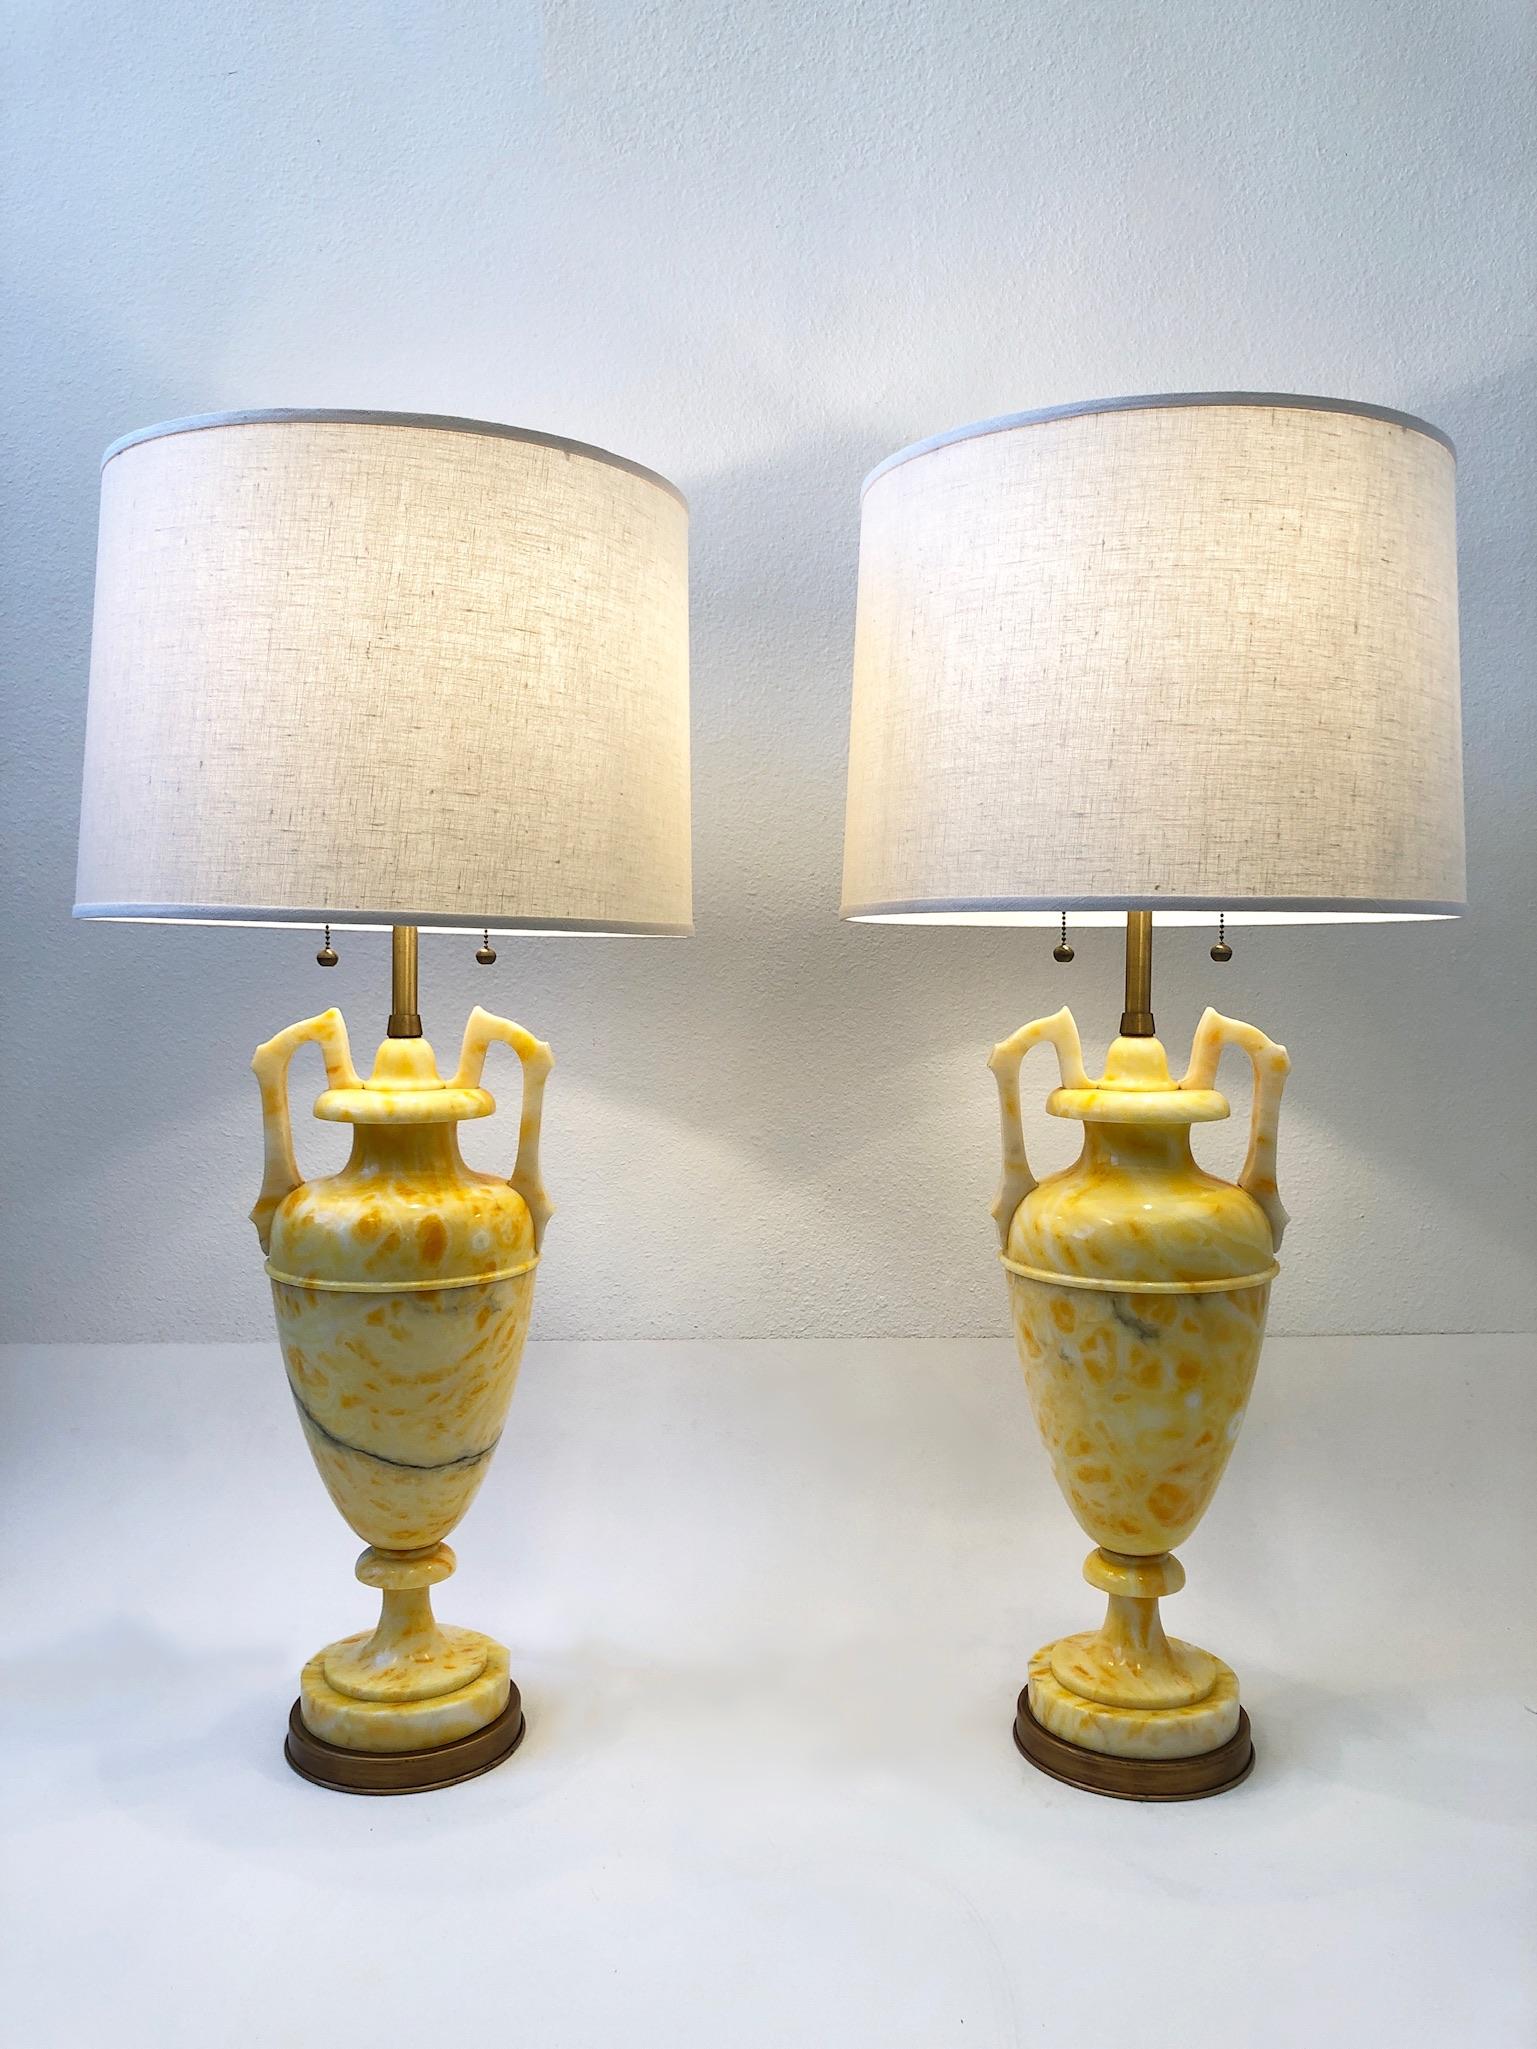 Spectacular pair of Italian yellow marble and satin brass table lamps by Marbro Lamp Co. 
Vibrant yellow color. Newly rewired and new vanilla linen shades. 
Measurements: 38” High and 18” Diameter.